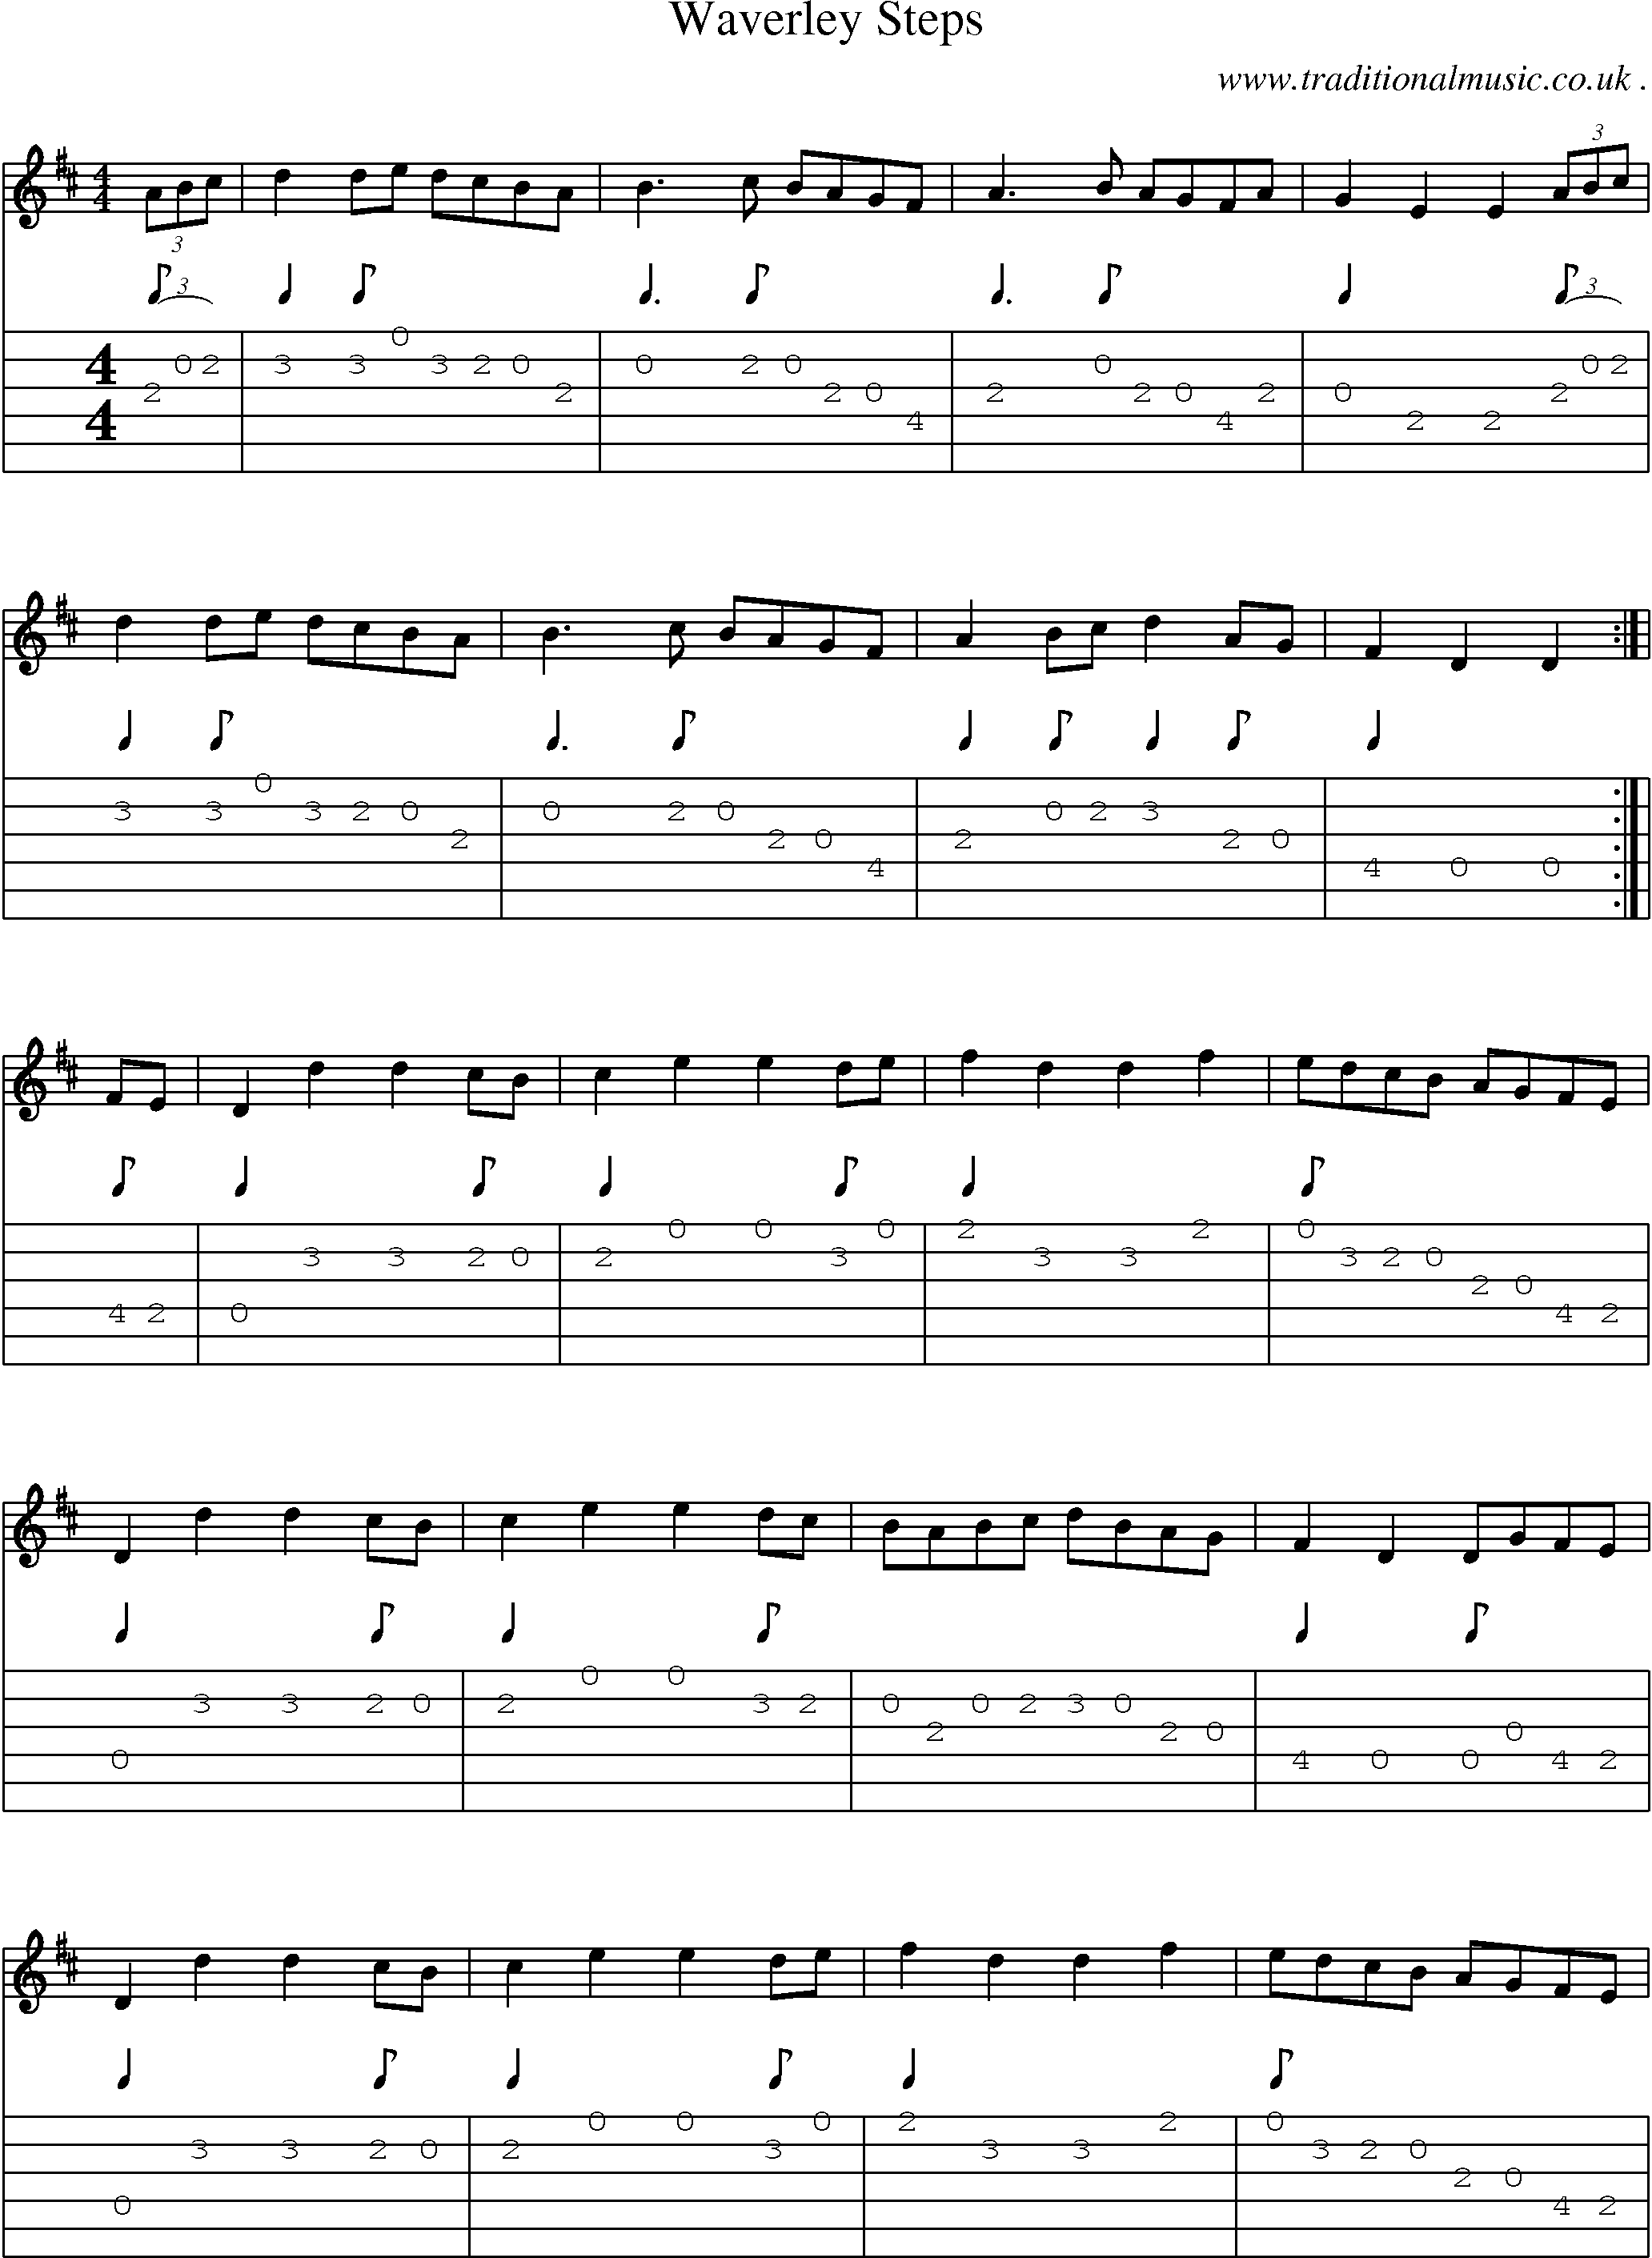 Sheet-Music and Guitar Tabs for Waverley Steps